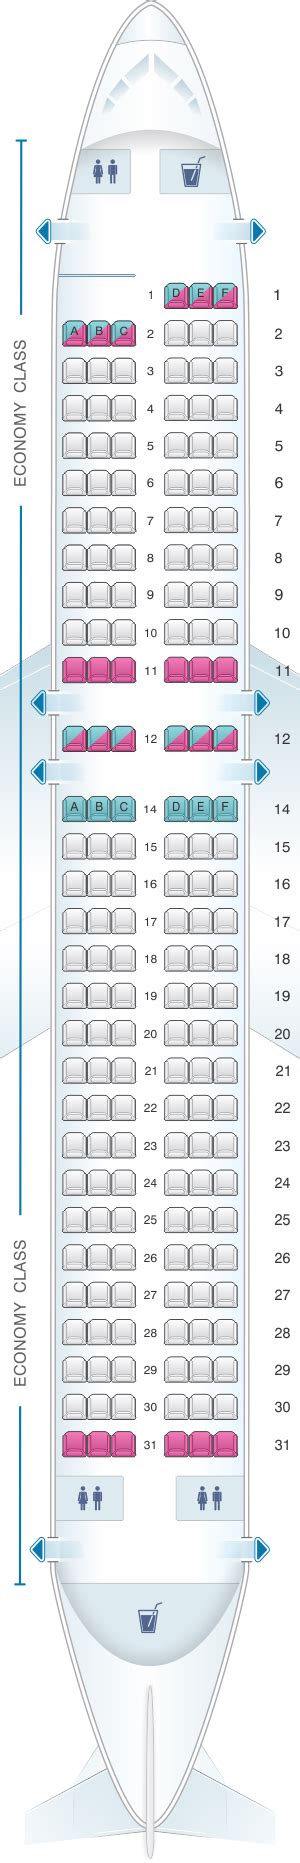 Allegiant air plane seating chart. No window on this row, and on one flight (same seat for both flights) an intermittent lavatory smell was a problem - I believe however that this issue affected several rows, not just the last one. On the flight back however there were no problems. Two closets both in the tail, not a shared wall with the last row. Otherwise, I like Allegiant ... 